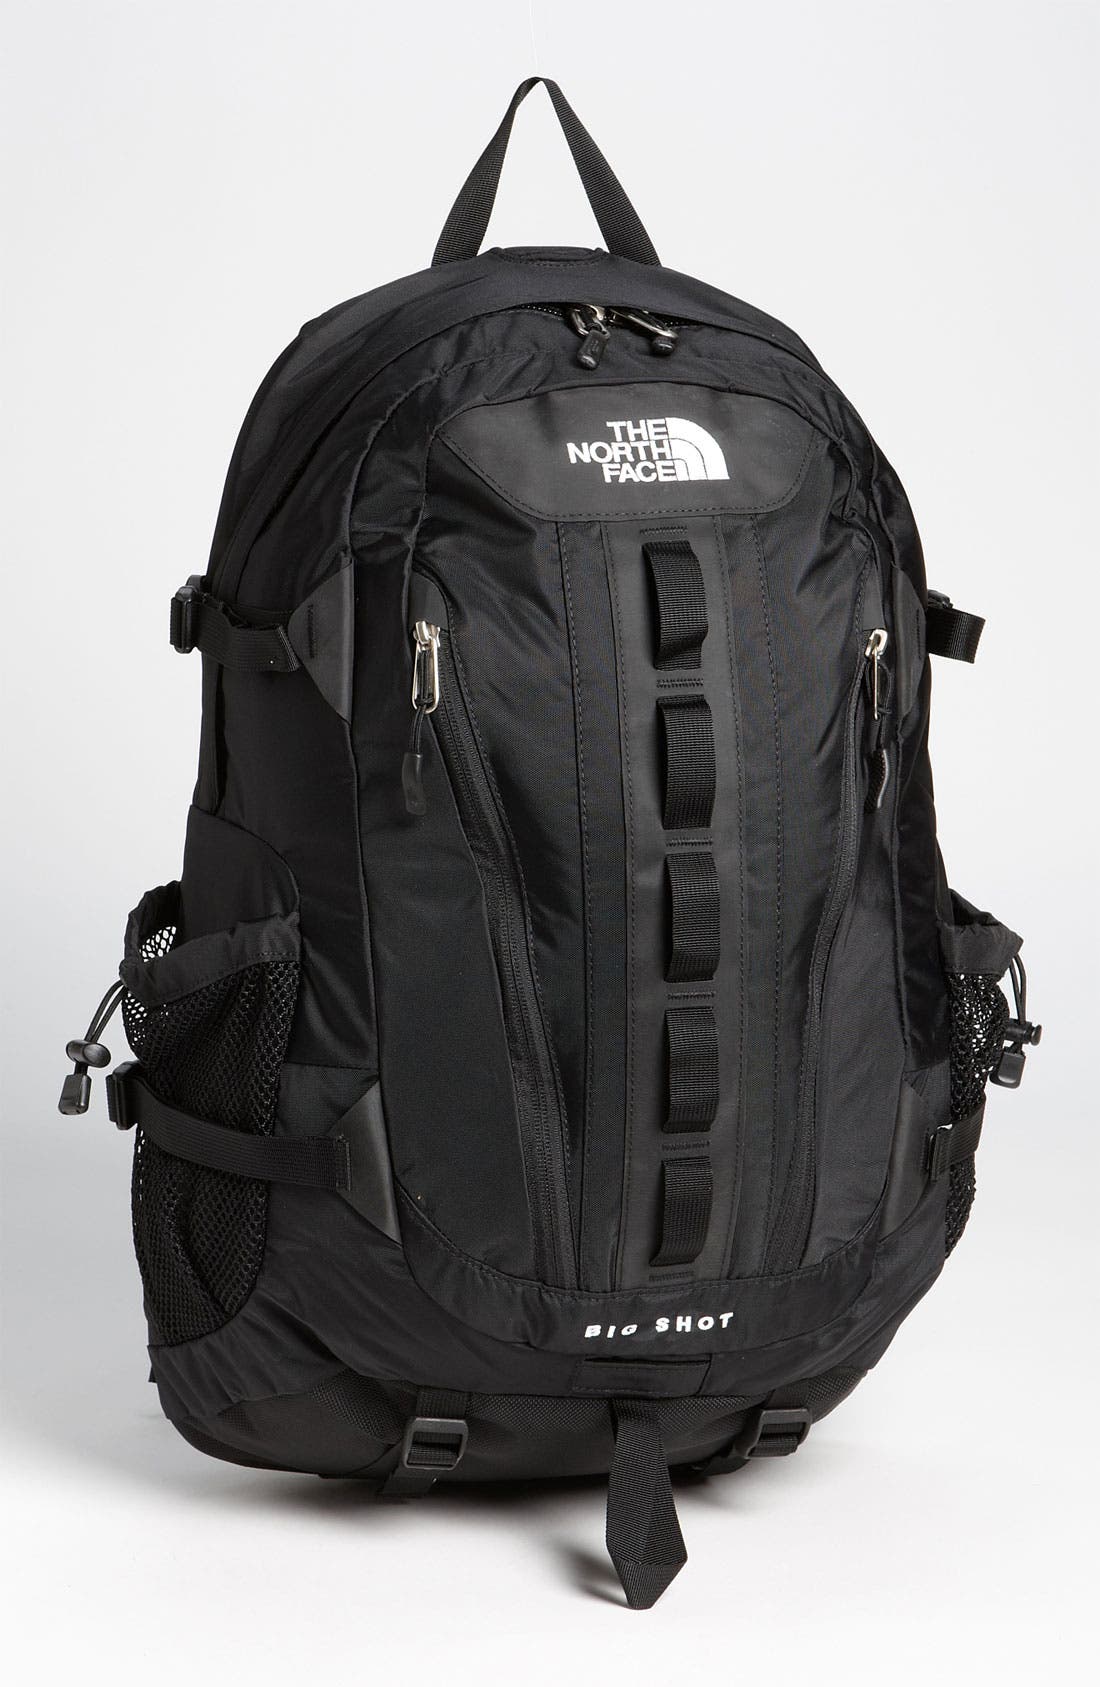 The North Face 'Big Shot' Backpack 